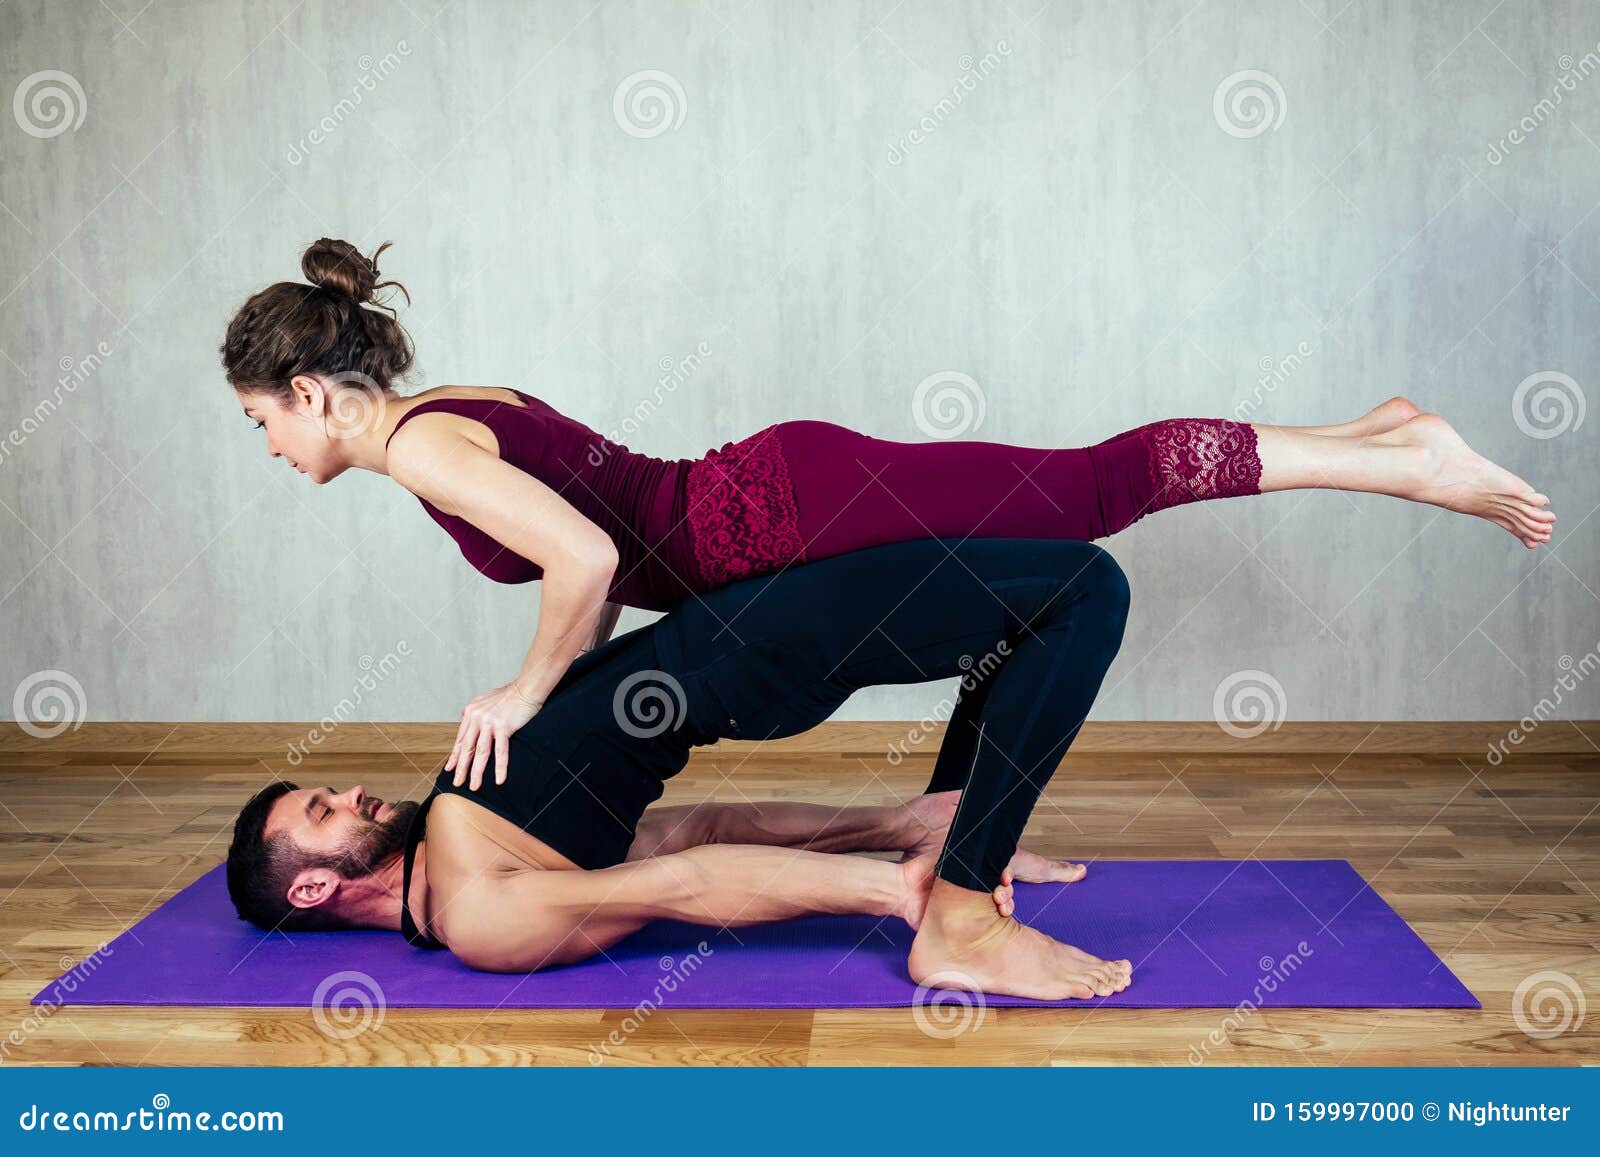 Yoga Sex Positions | 6 Sexual Yoga Poses To Try | Durex Canada